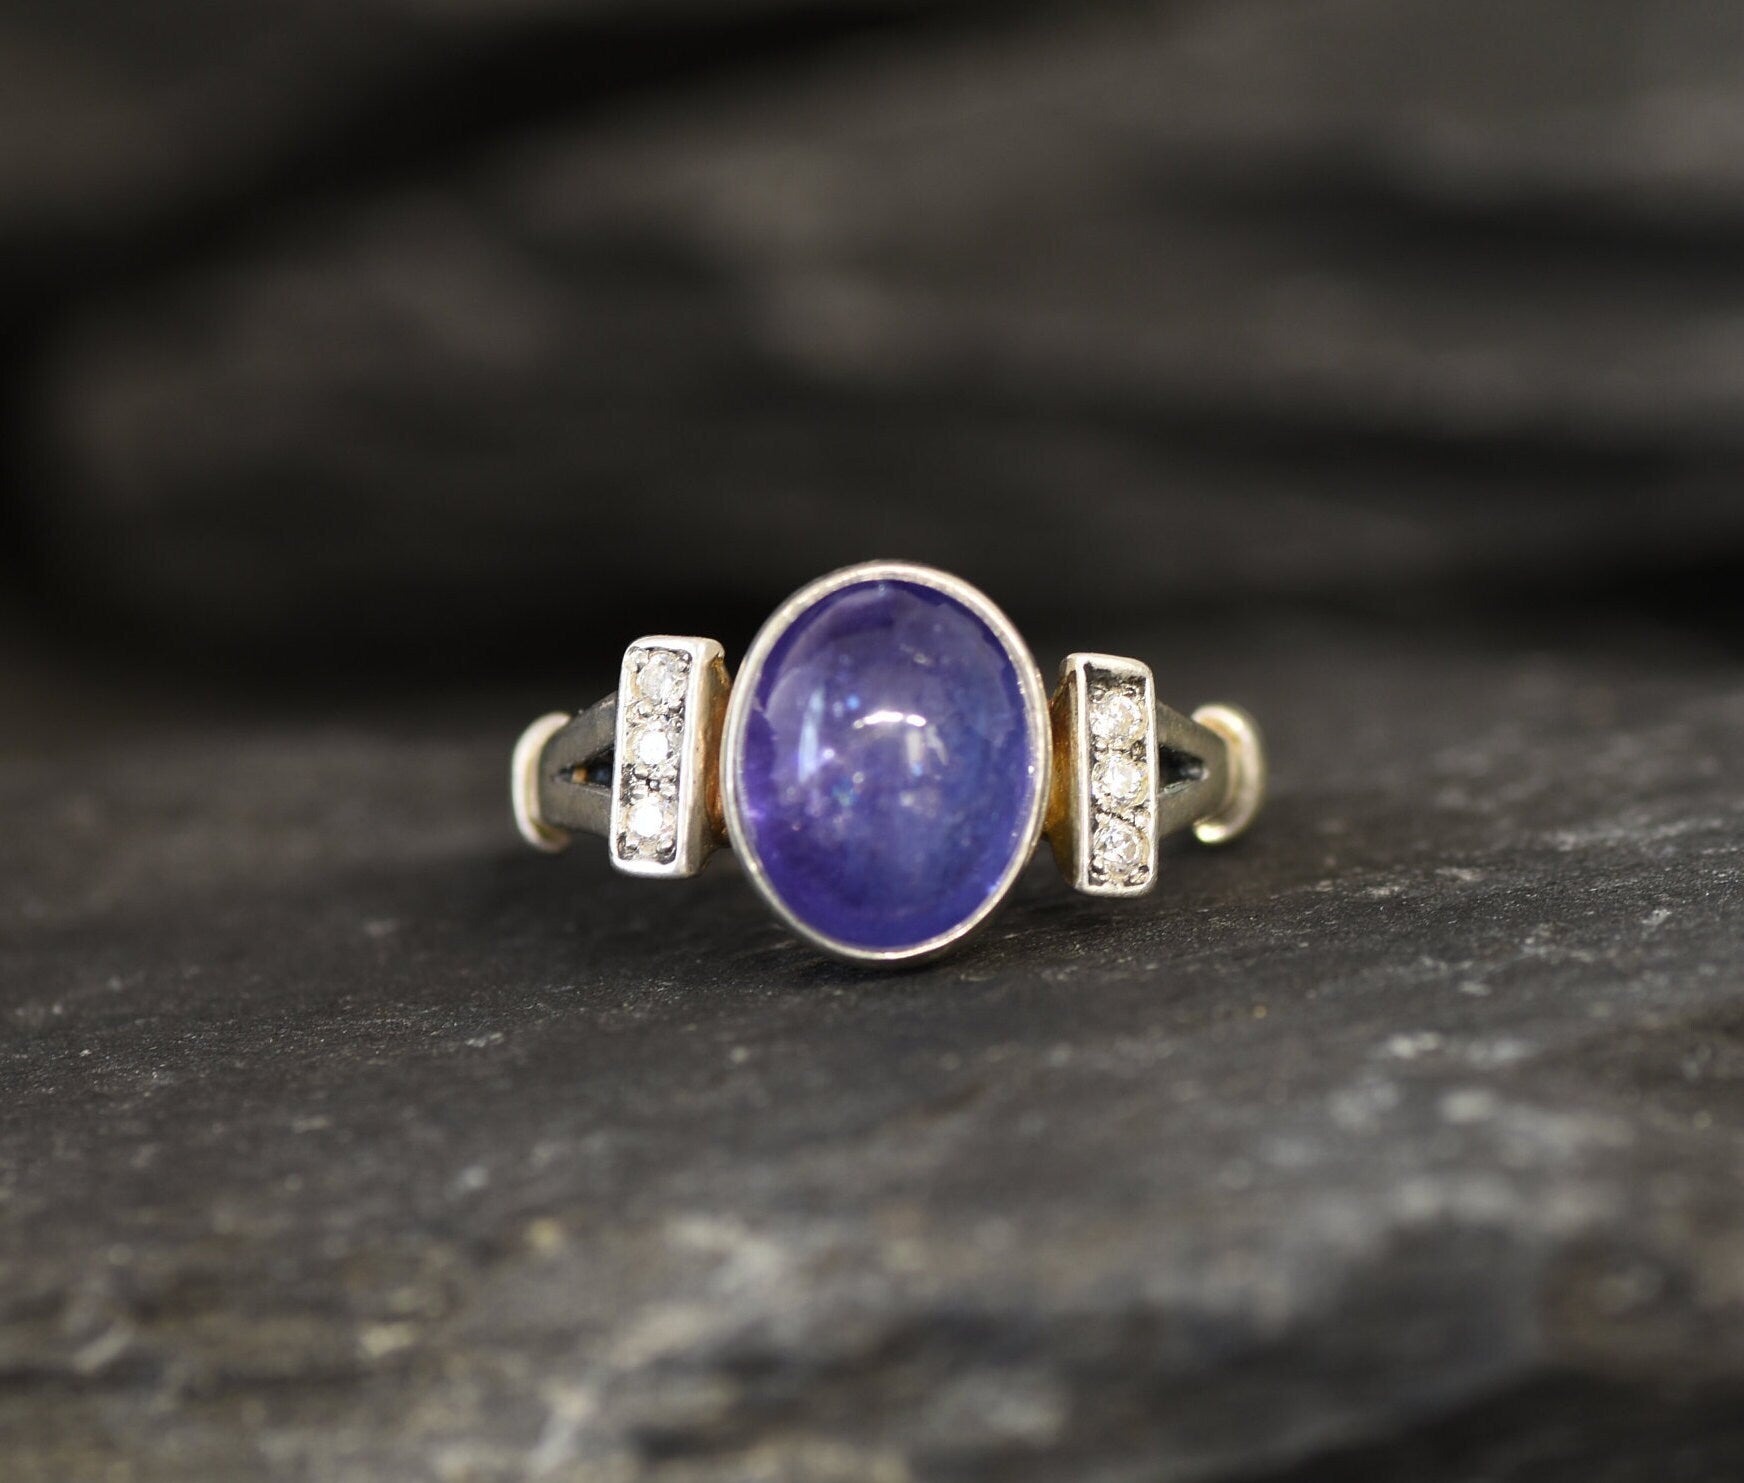 Genuine Tanzanite Ring - Blue Promise Ring - Vintage Oval Ring